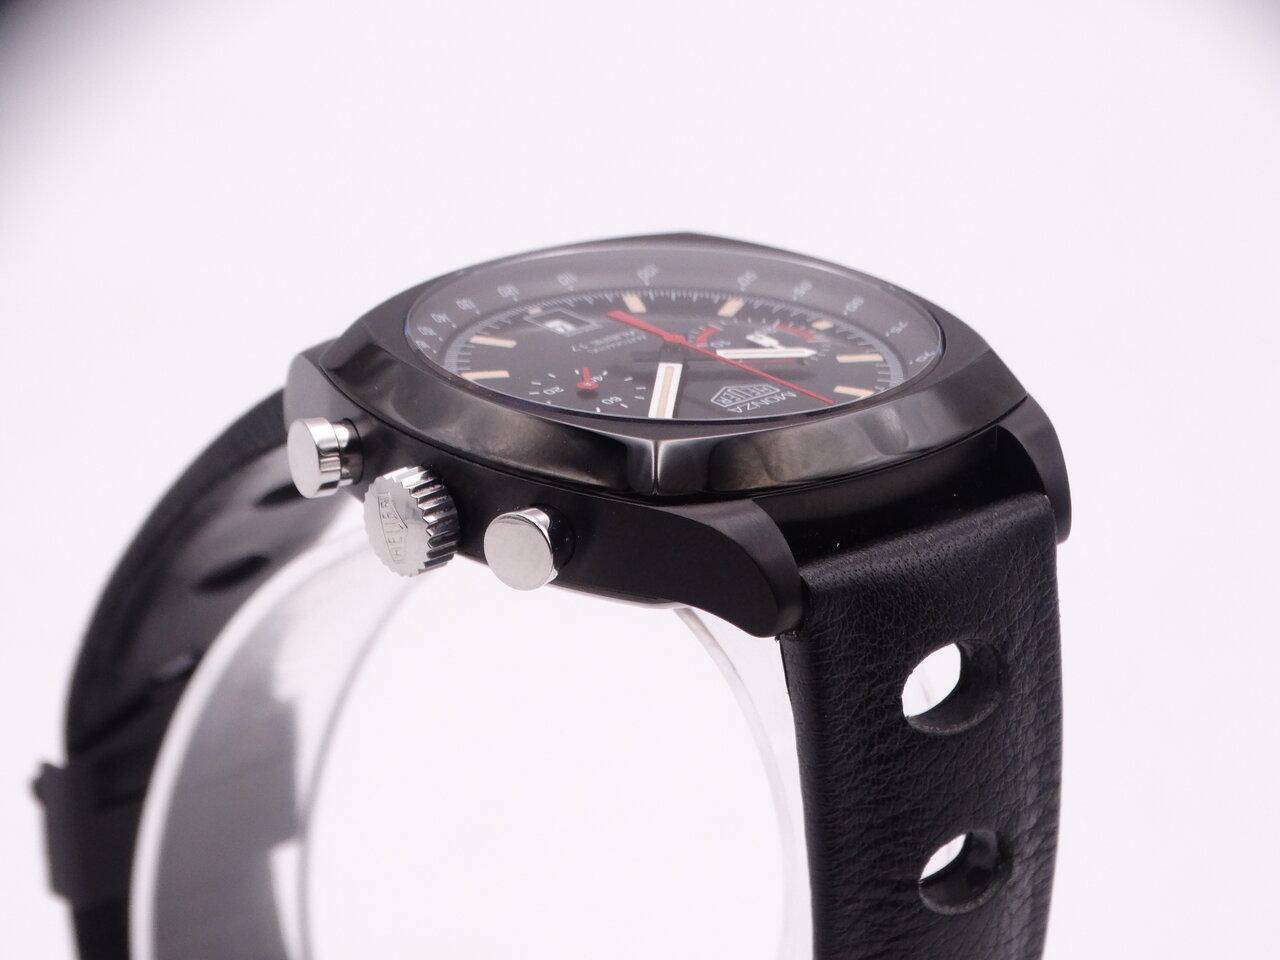 Tag Heuer Monza Chronograph Limited Edition 08950.JPG